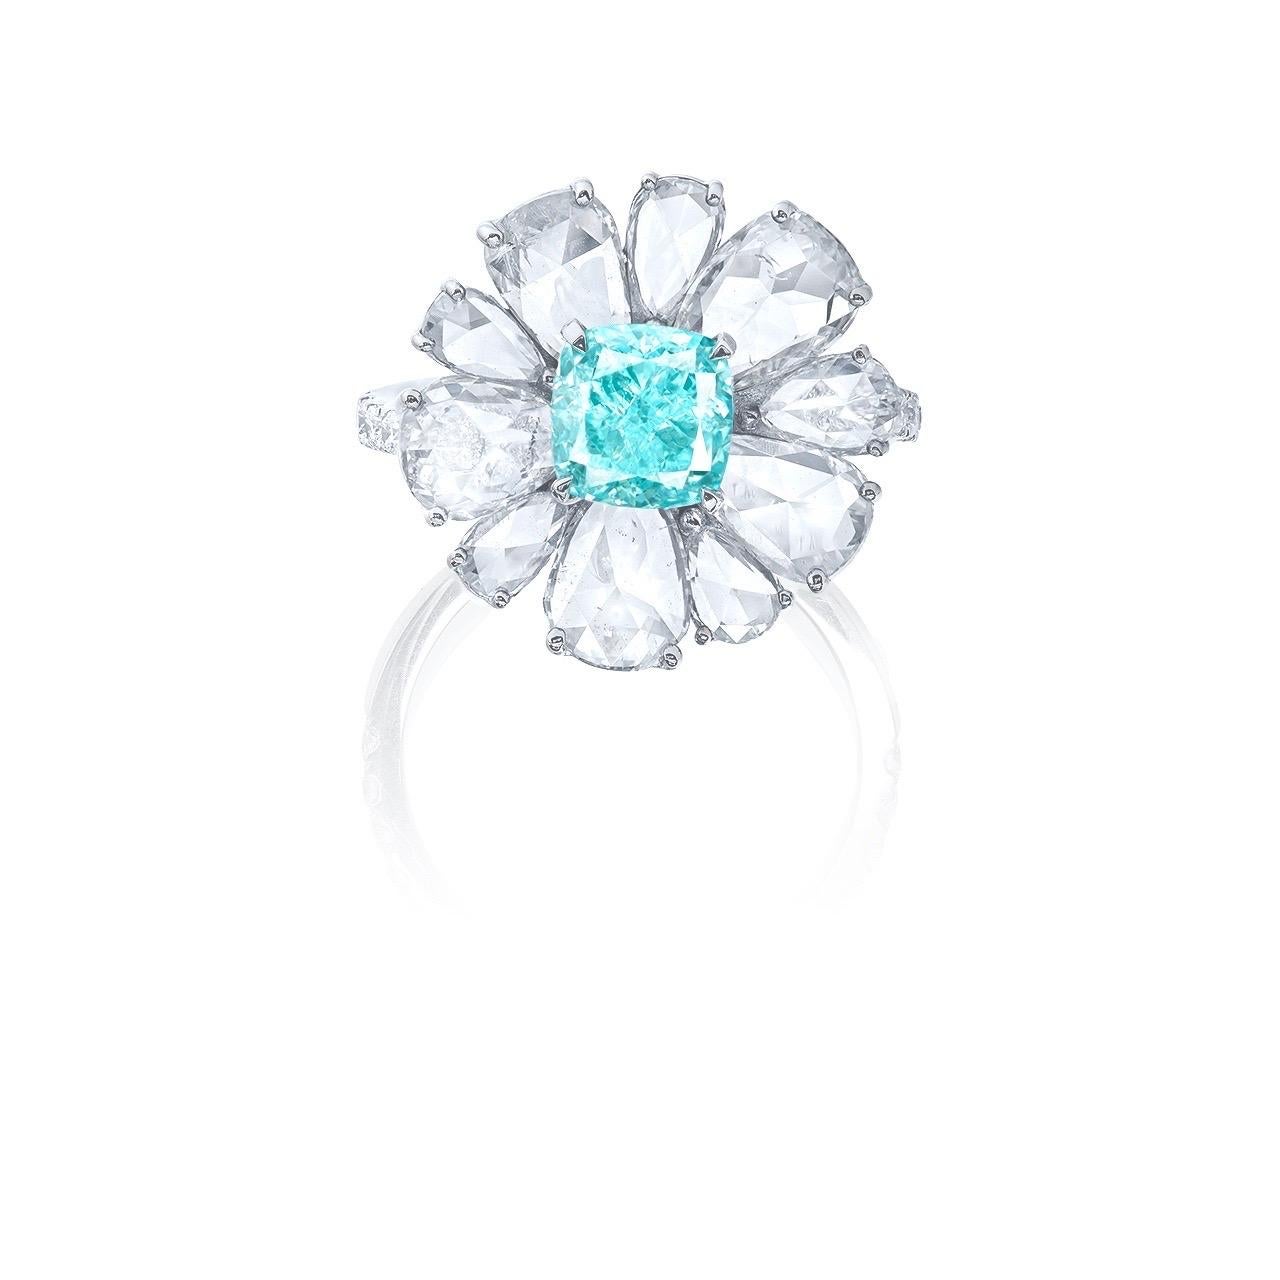 From Emilio Jewelry, a dealer and wholesaler located on New York's iconic Fifth Avenue,
Main stone: 1.50 + carat Gia certified natural Fancy L. Greenish Blue 
Matching setting: 10 white diamonds totaling about 3.15 carats, 18 white diamonds totaling